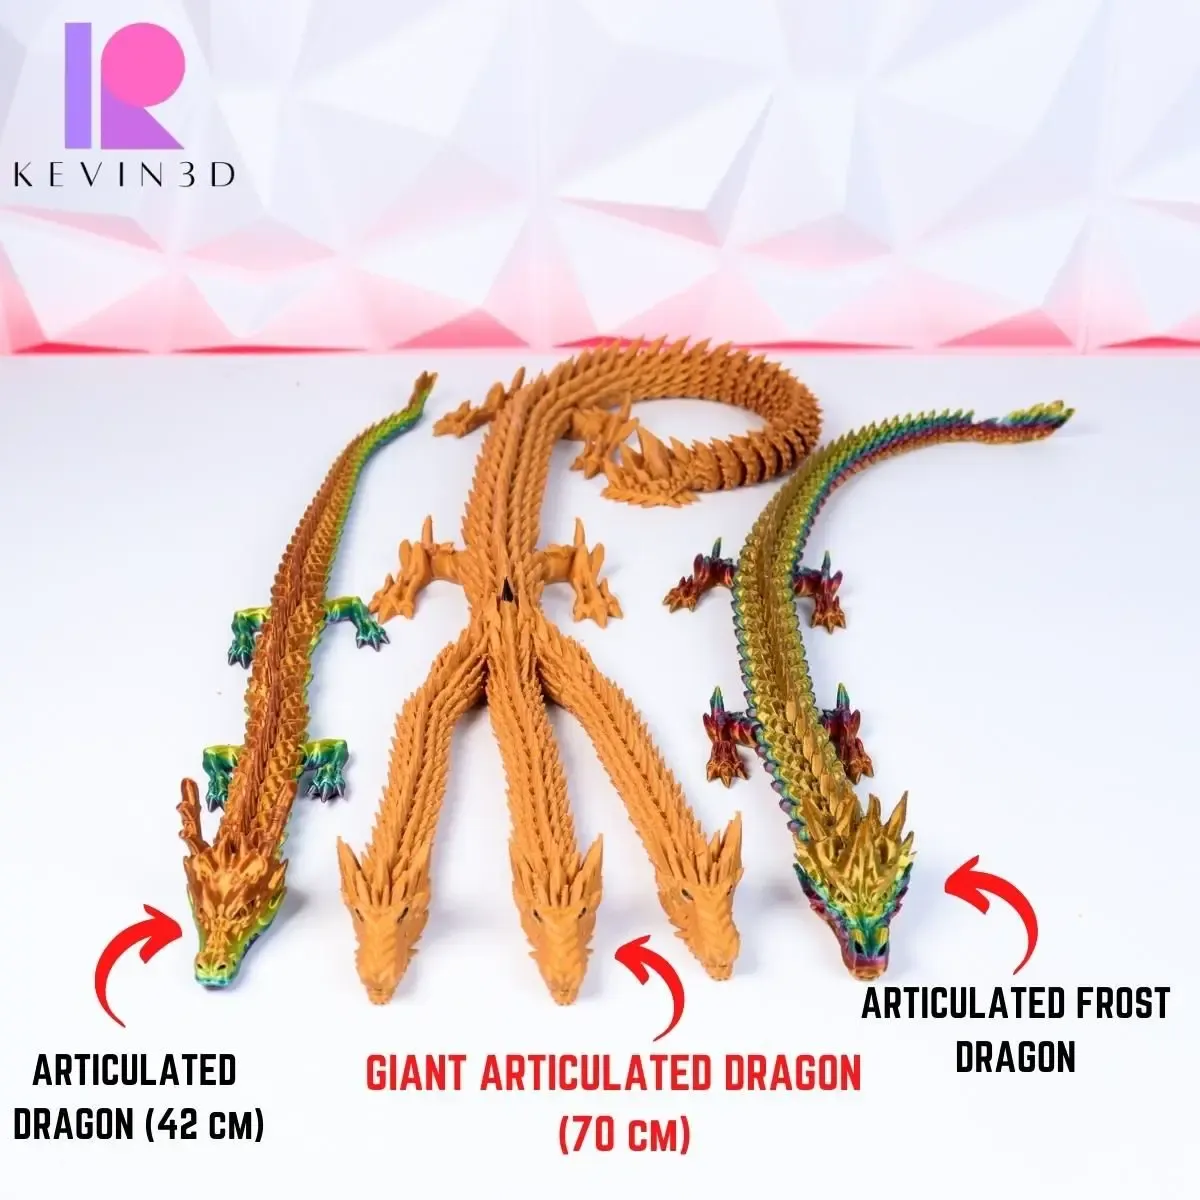 GIANT ARTICULATED DRAGON WITH 3 HEADS FLEXI WIGGLE PET